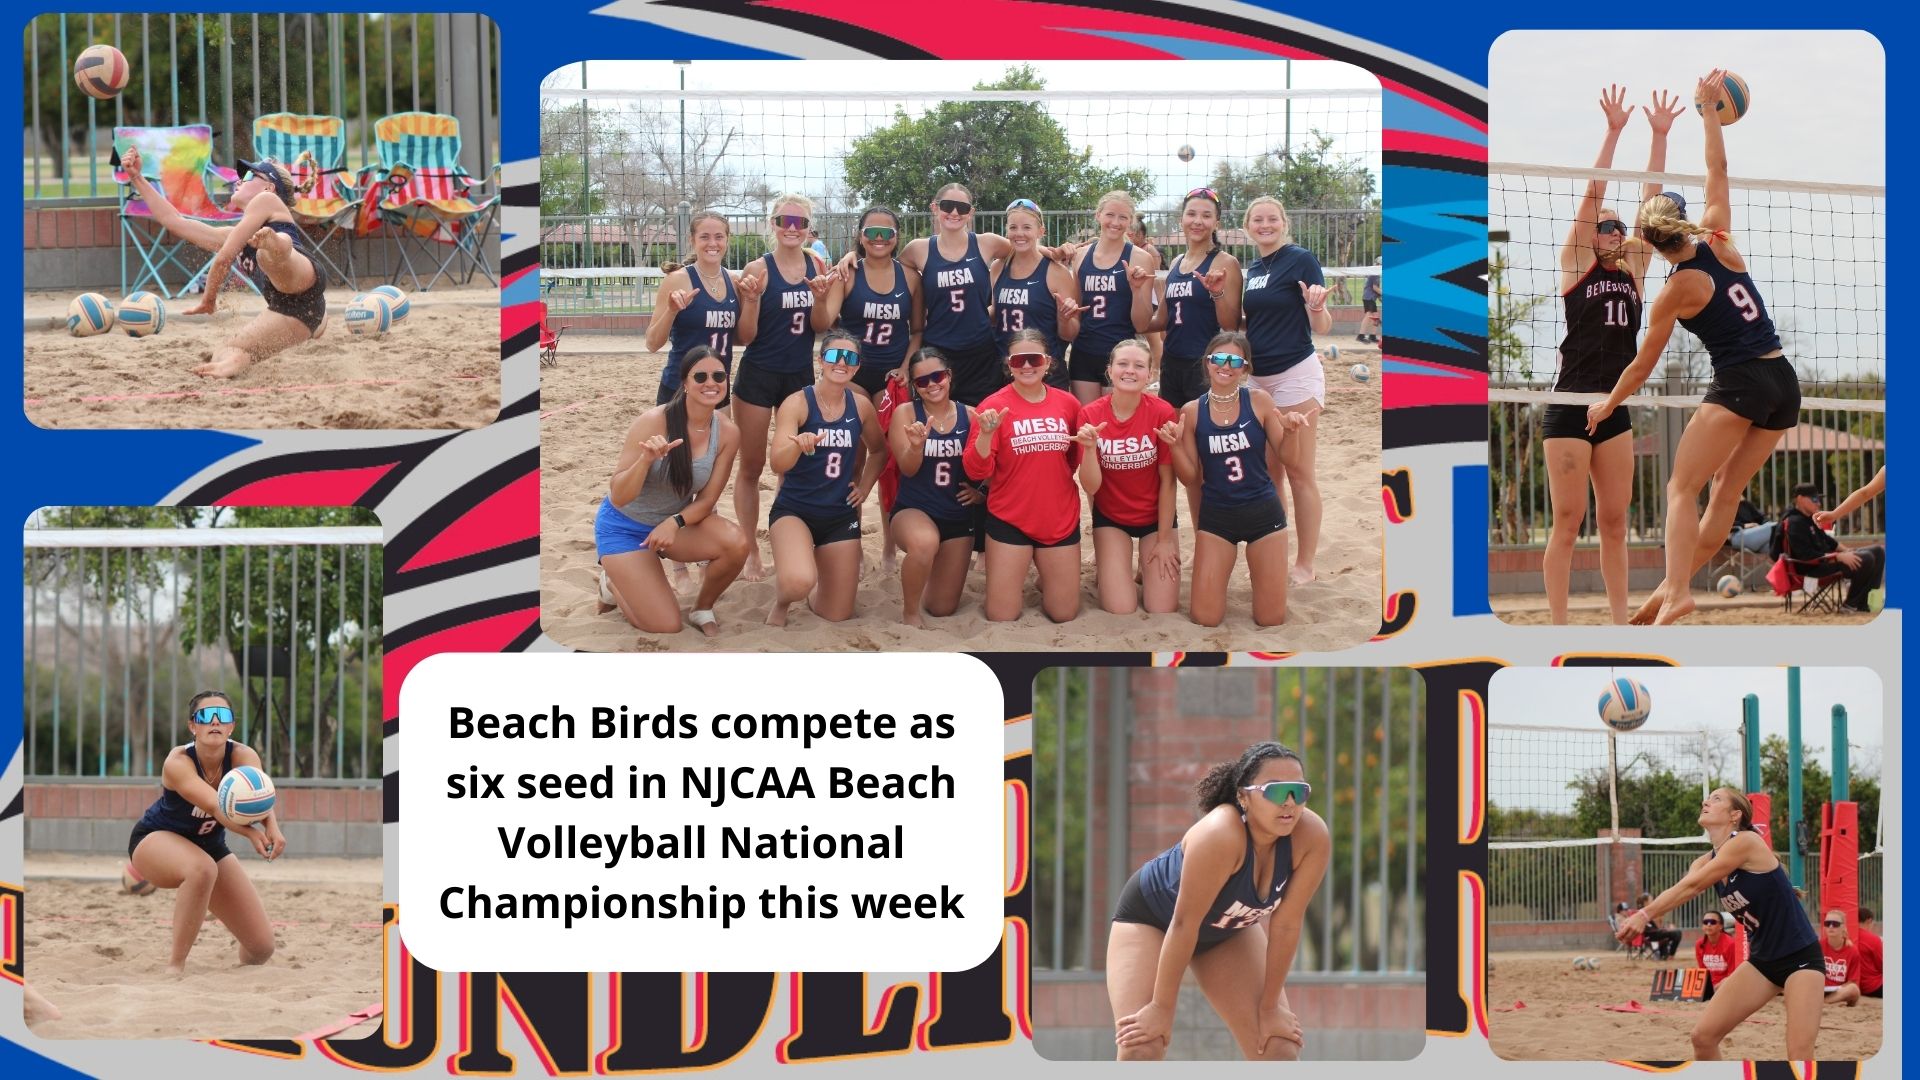 Beach Birds take to the sand on Thursday in Pool play of NJCAA Beach Volleyball Championship